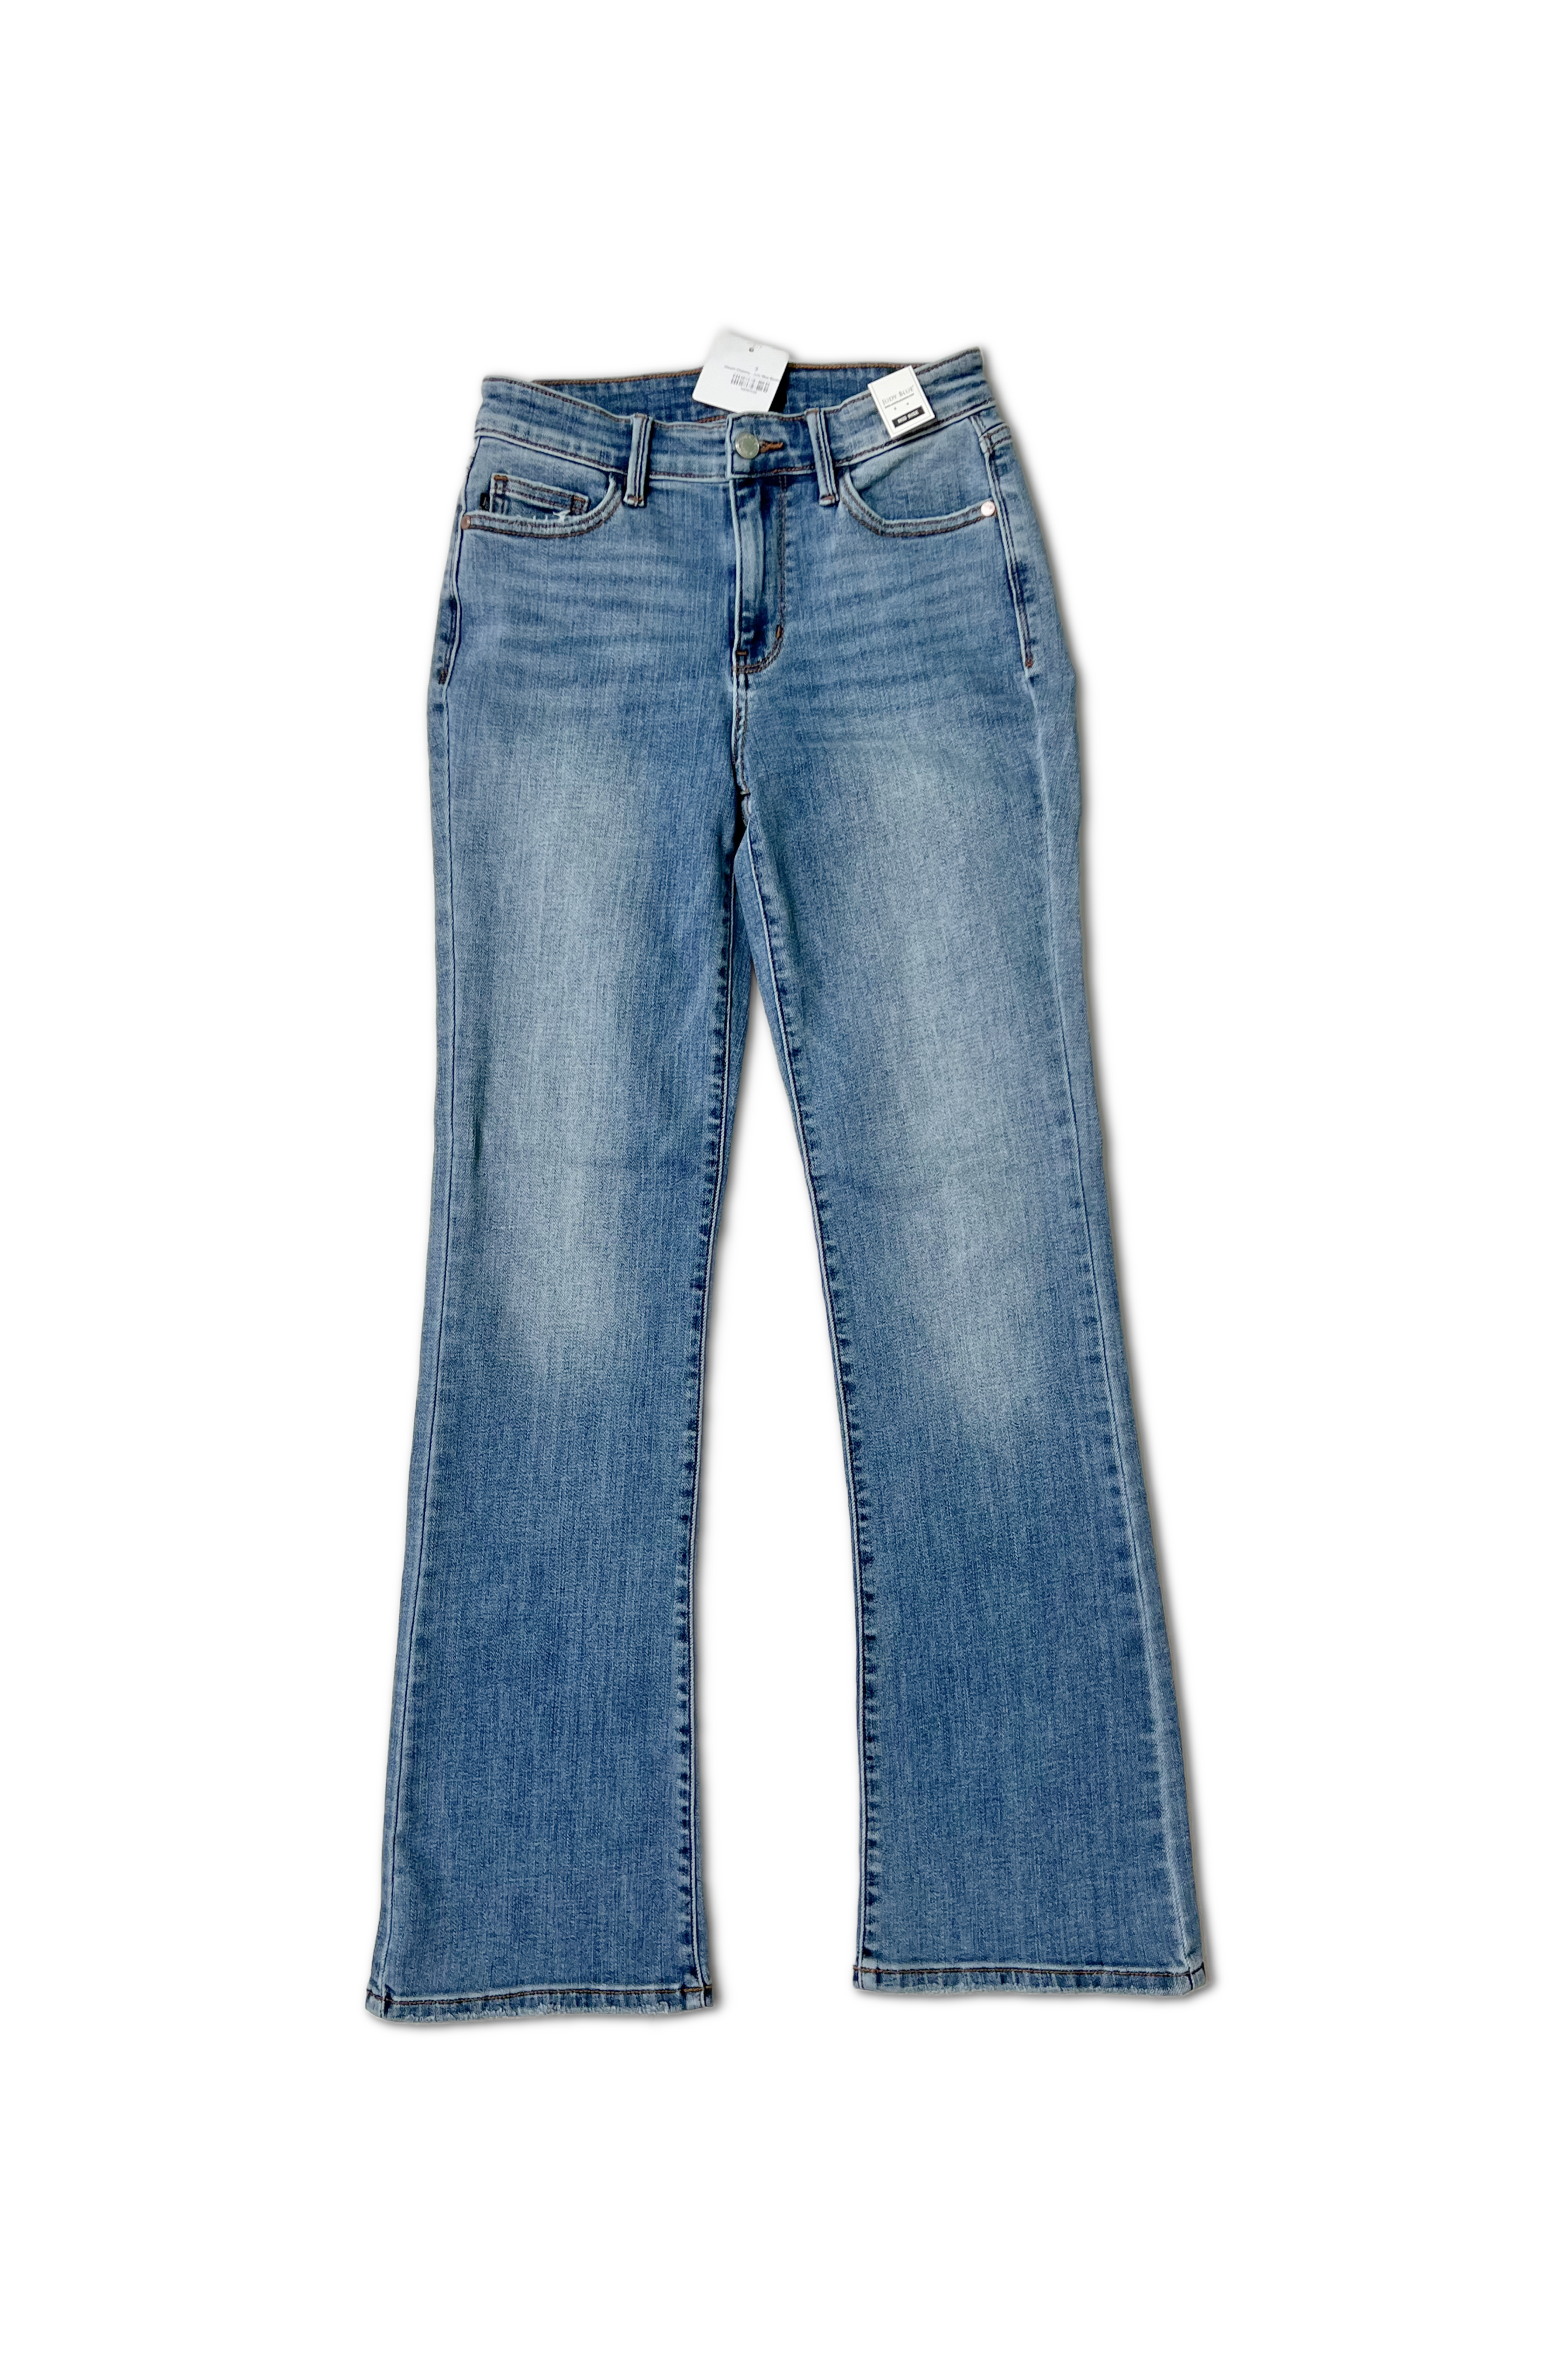 Dream Chasing - Judy Blue Bootcuts JB Boutique Simplified